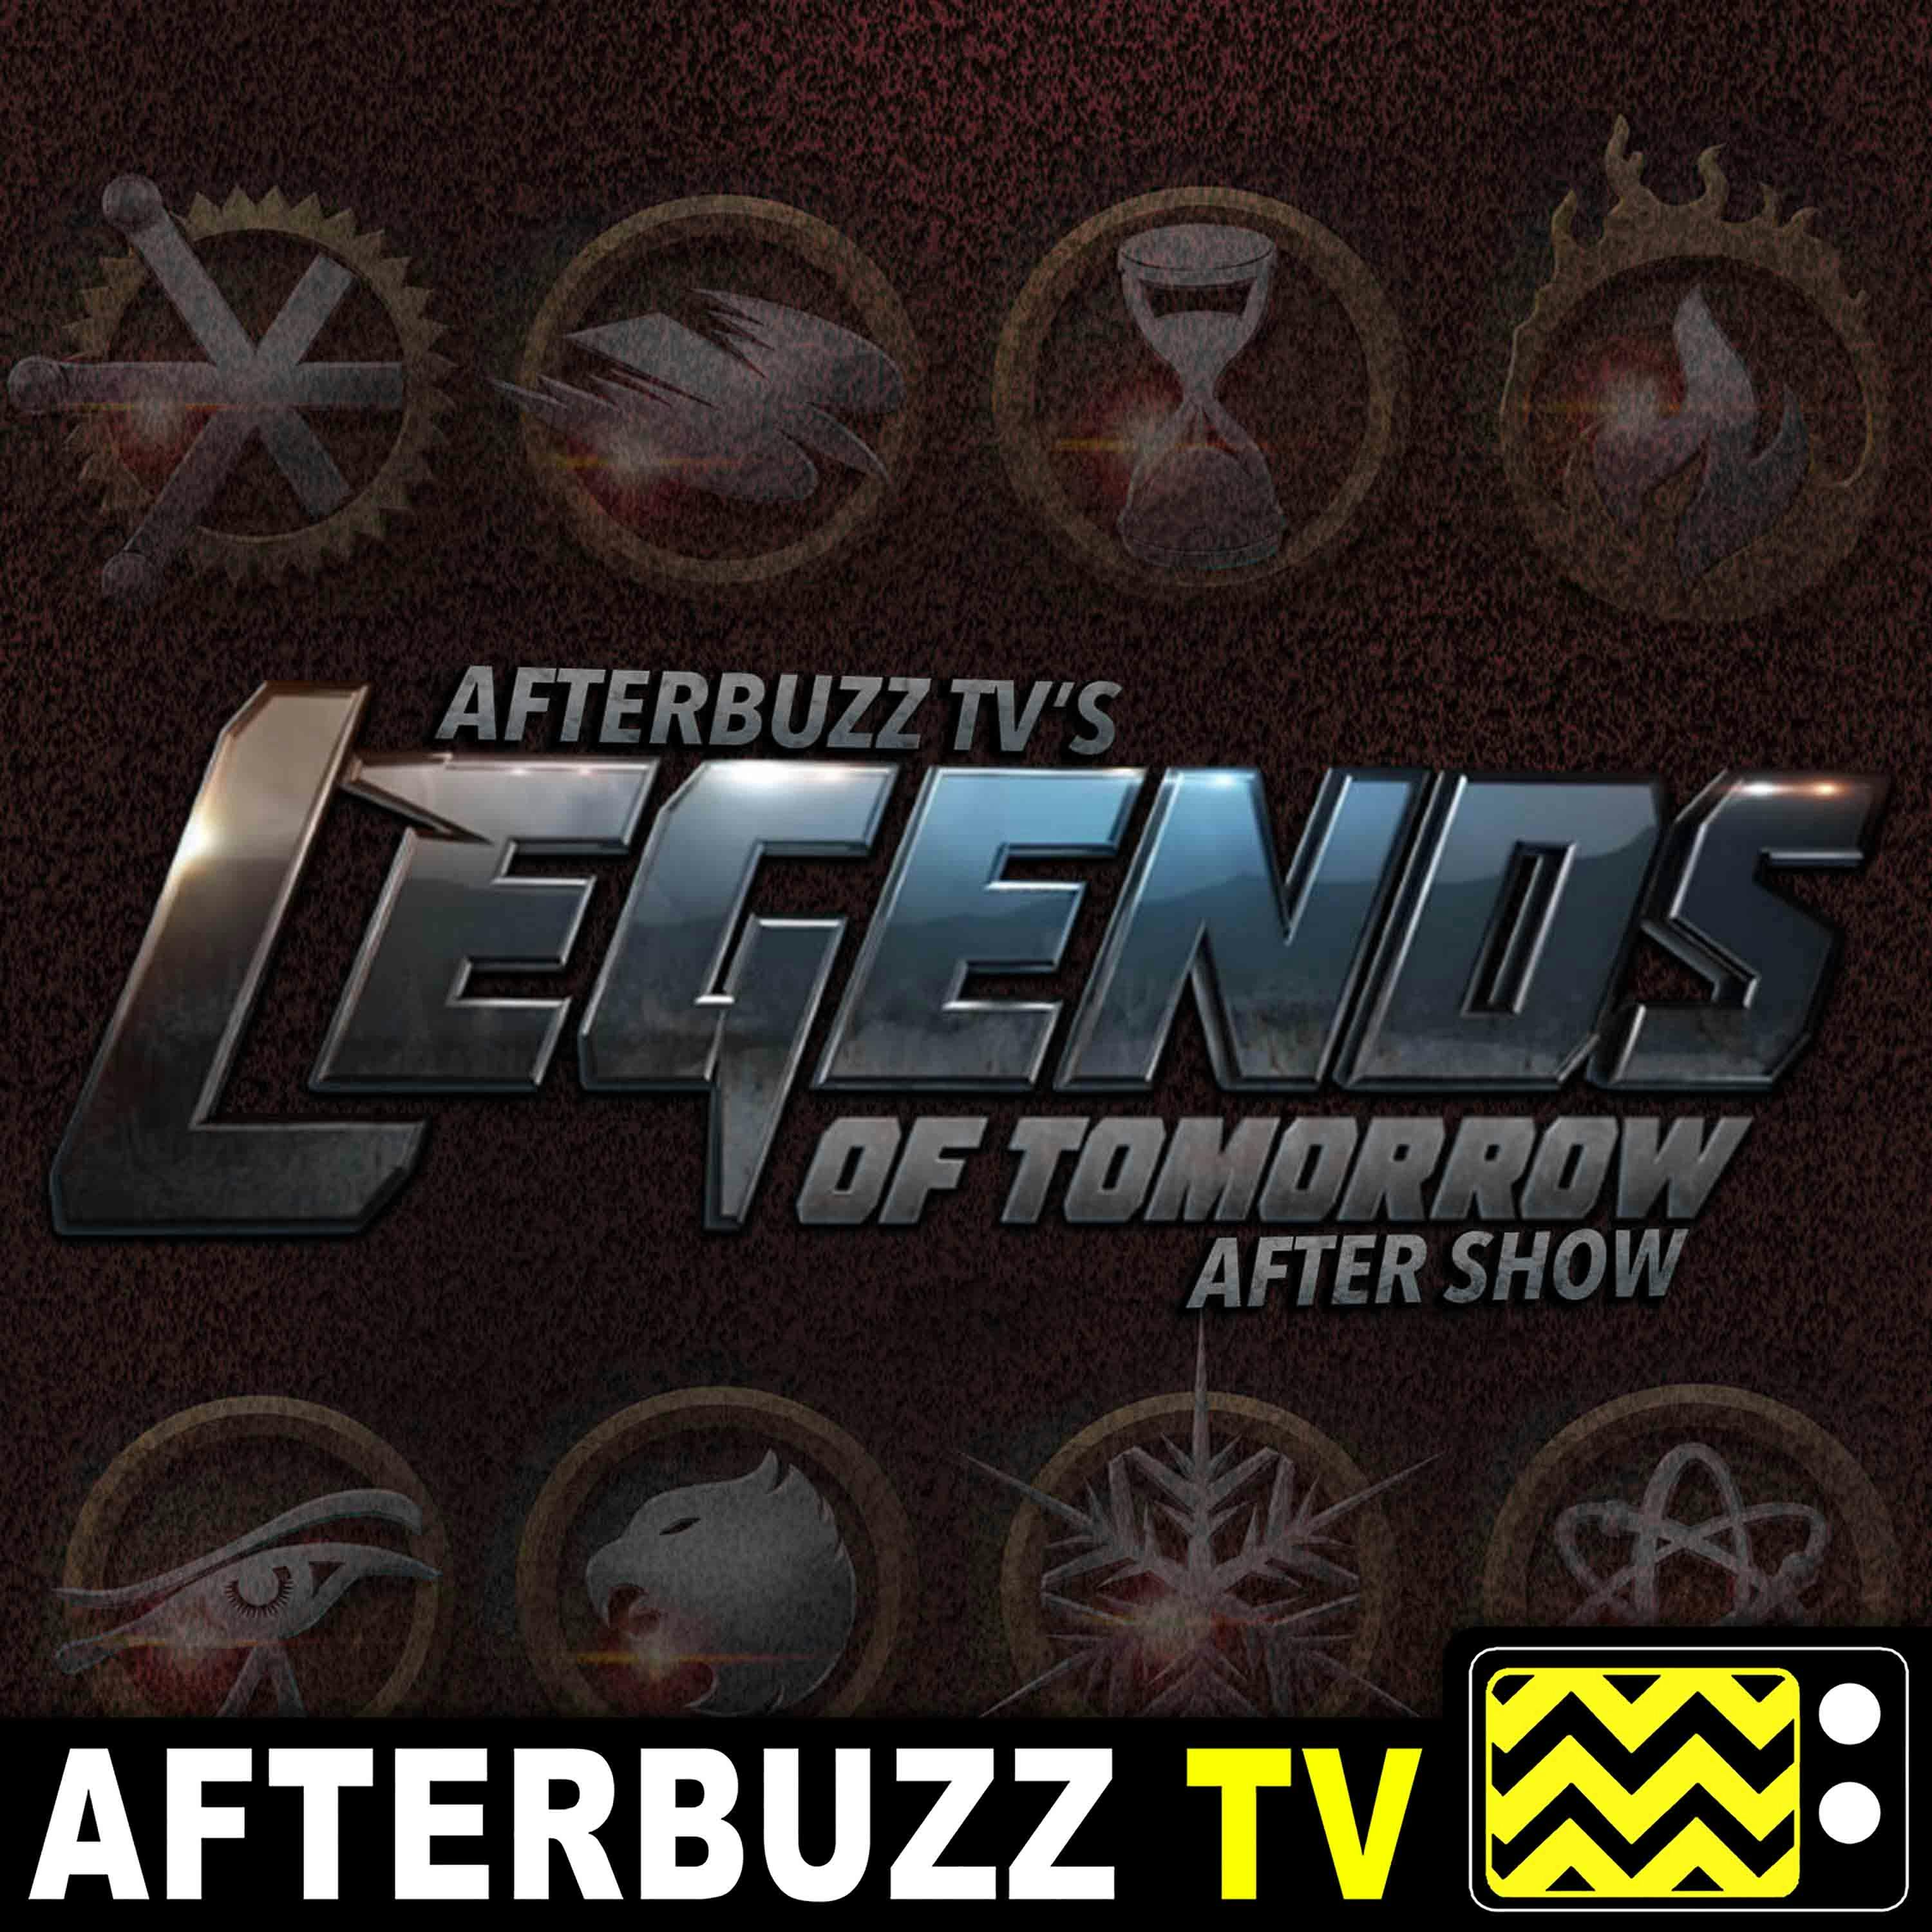 Legends Of Tomorrow S:1 | Their Time Is Now; The Dawn Of The Justice League | AfterBuzz TV AfterShow